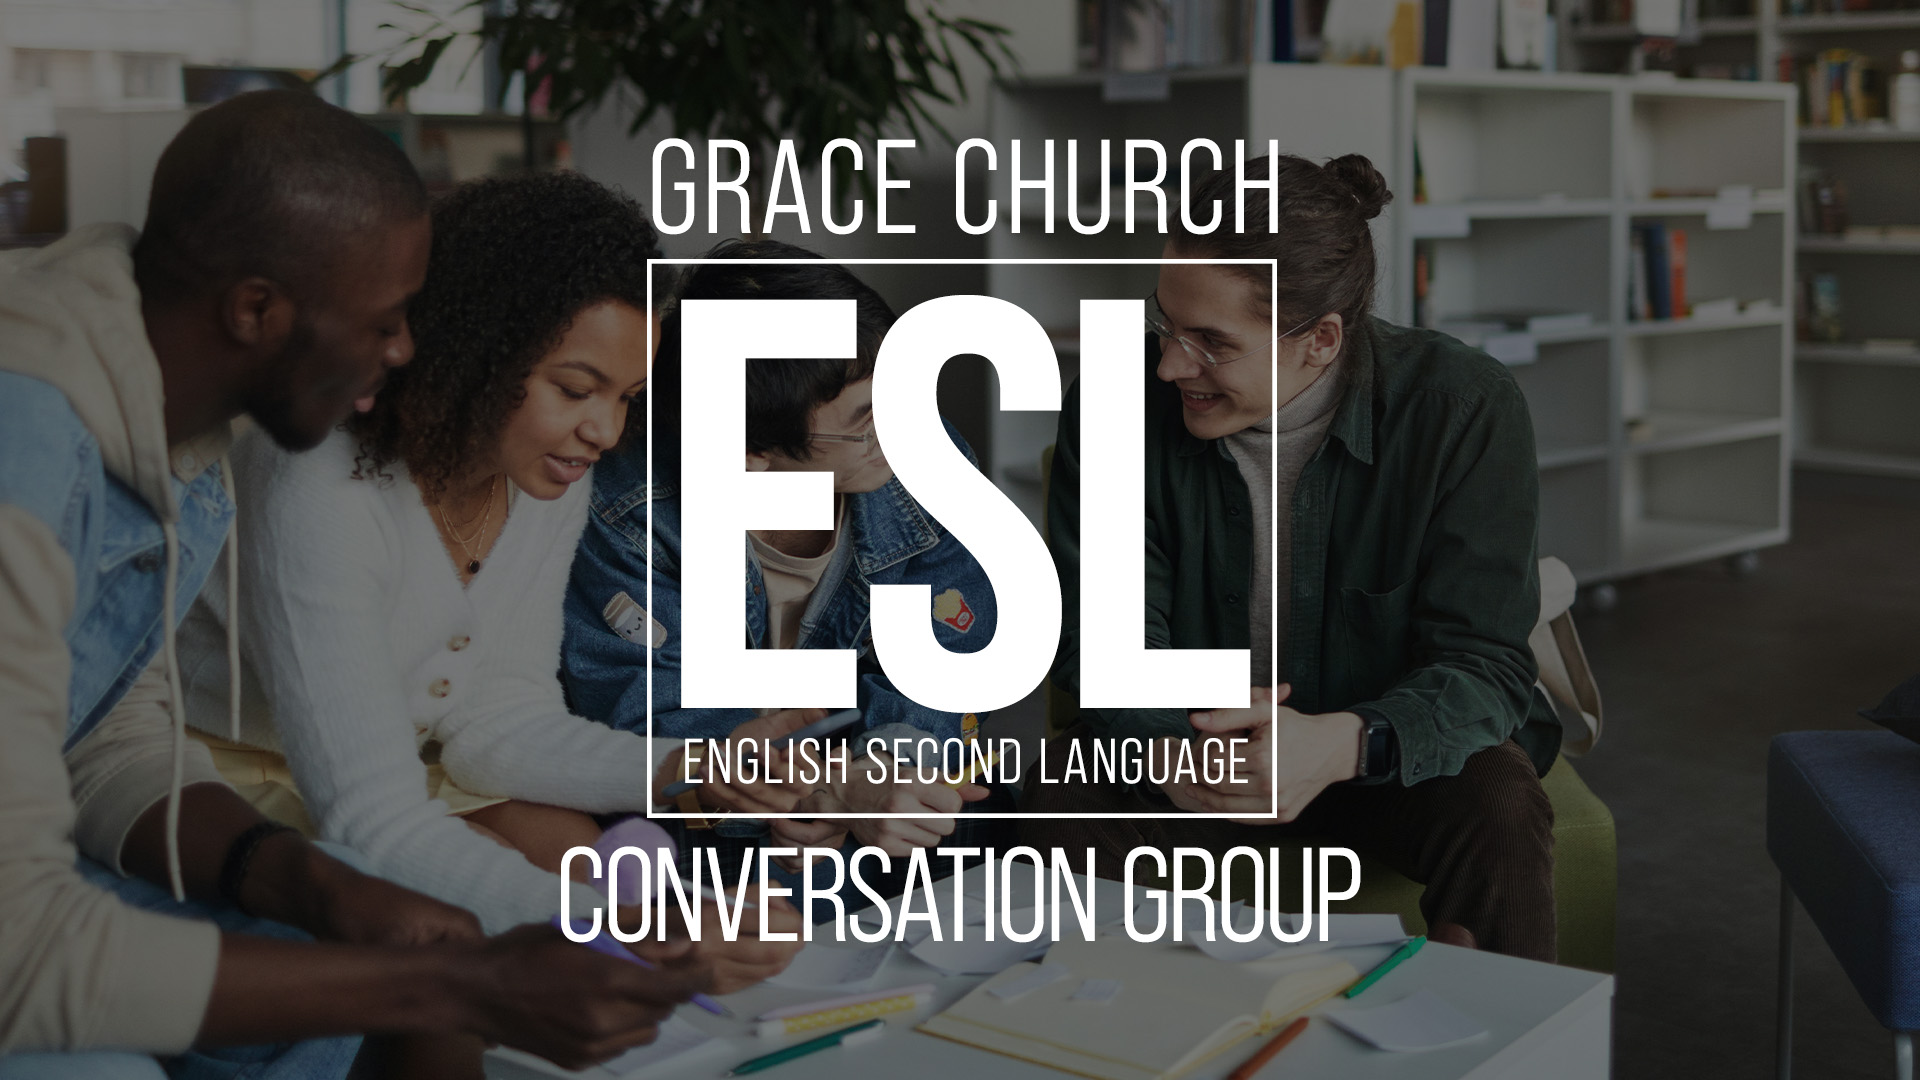 ESL Conversation Group

10-week group meeting at Grace Church | REACH Center
Thursday | 6:00pm
March 14 - May 16
